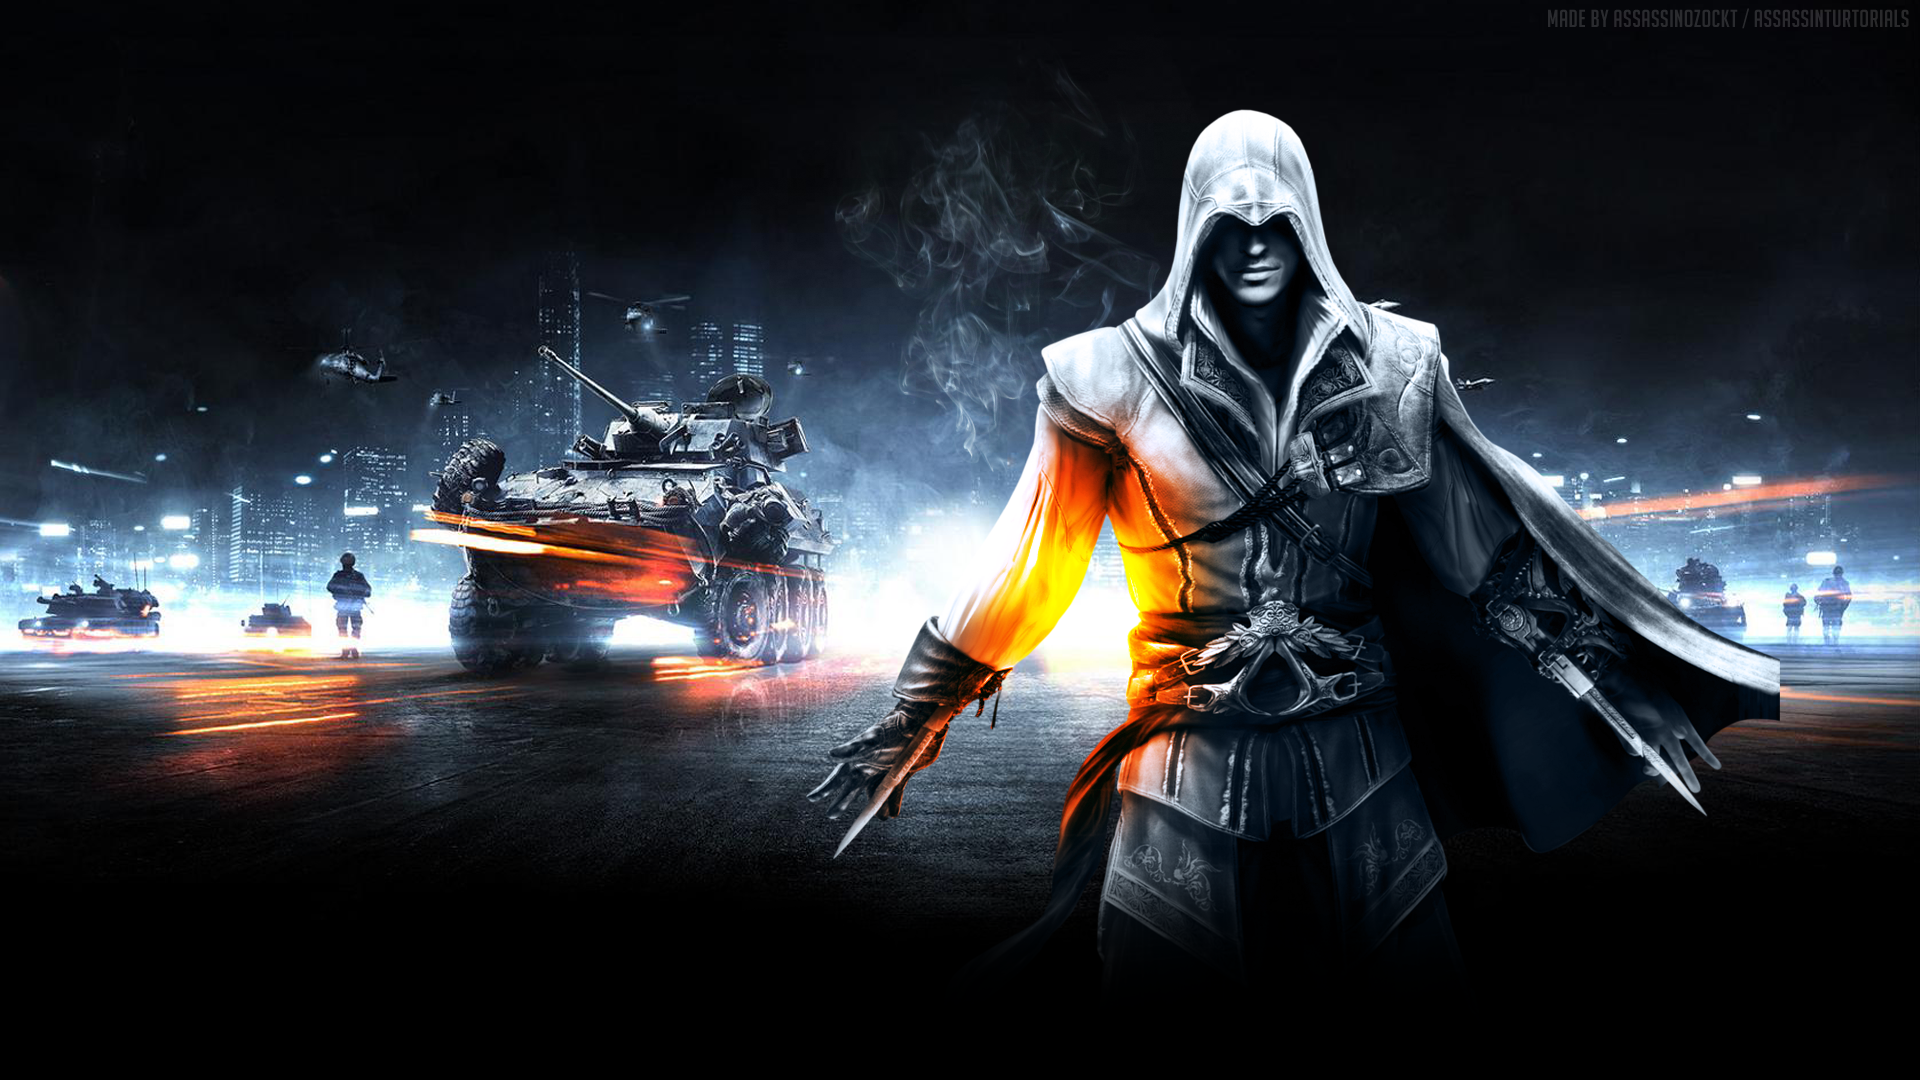 Video Game Backgrounds | Latest Hd Wallpapers, Computer Game PNG HD - Free PNG